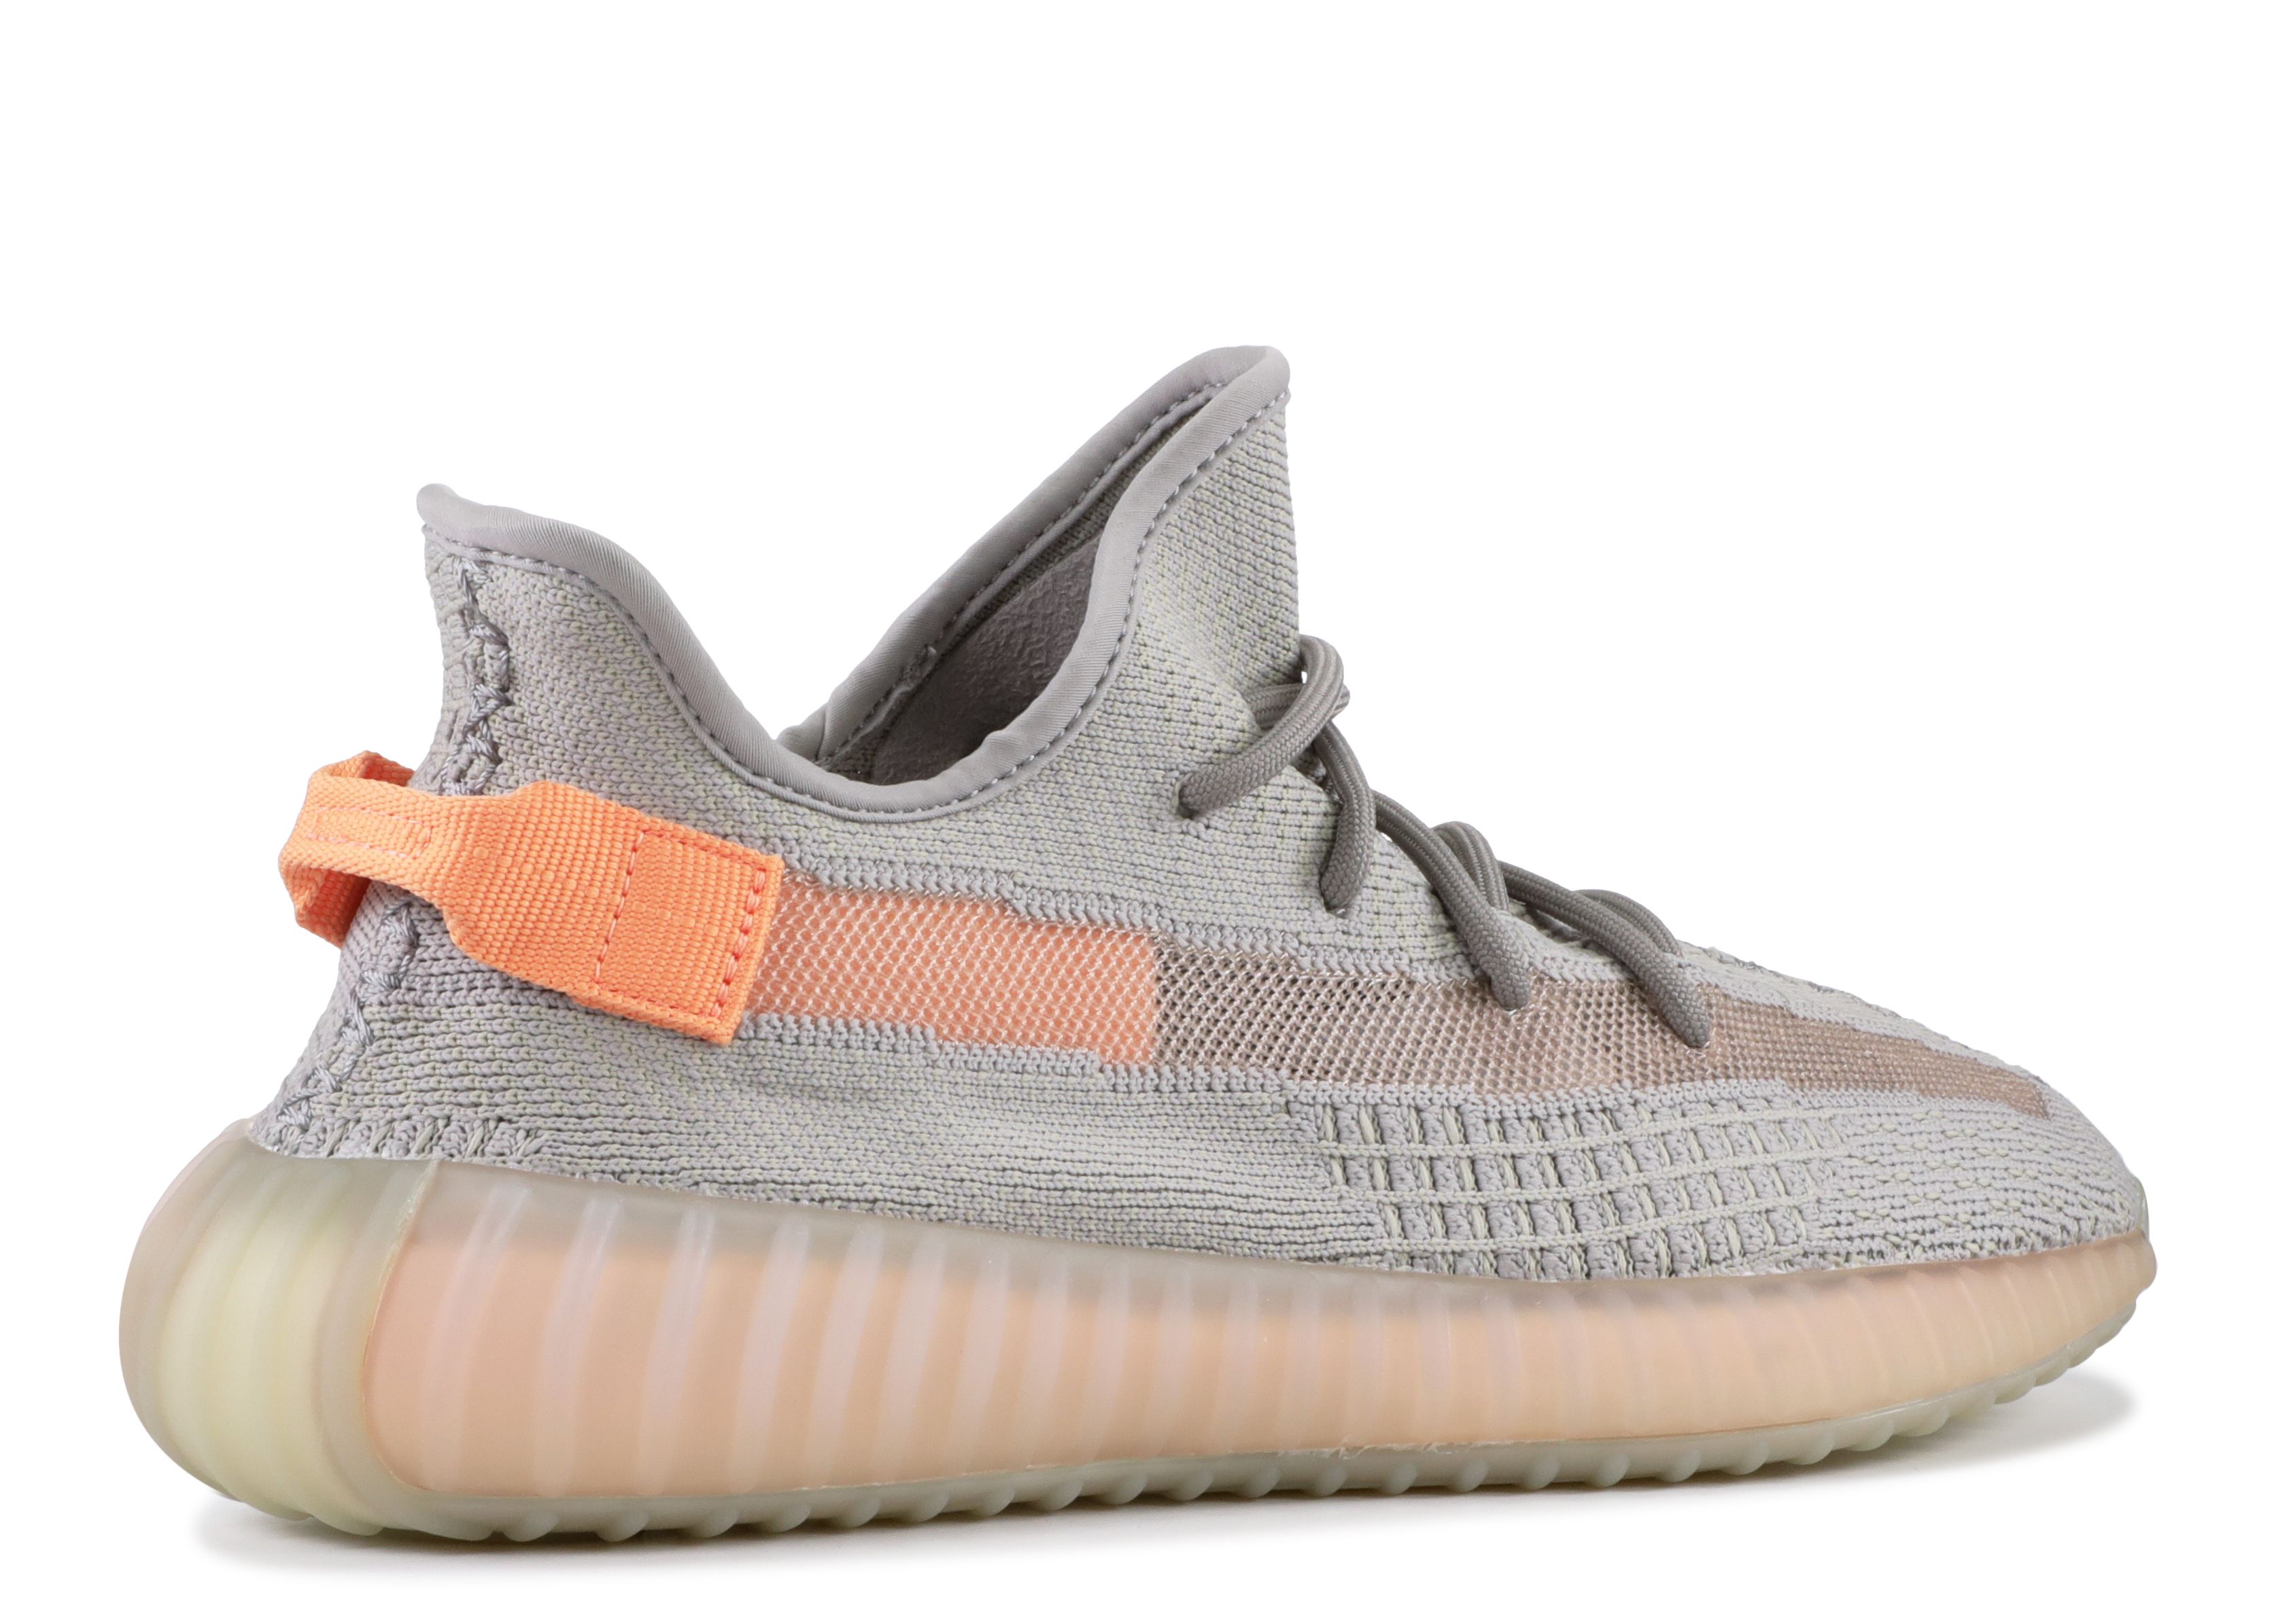 yeezy true form resell price